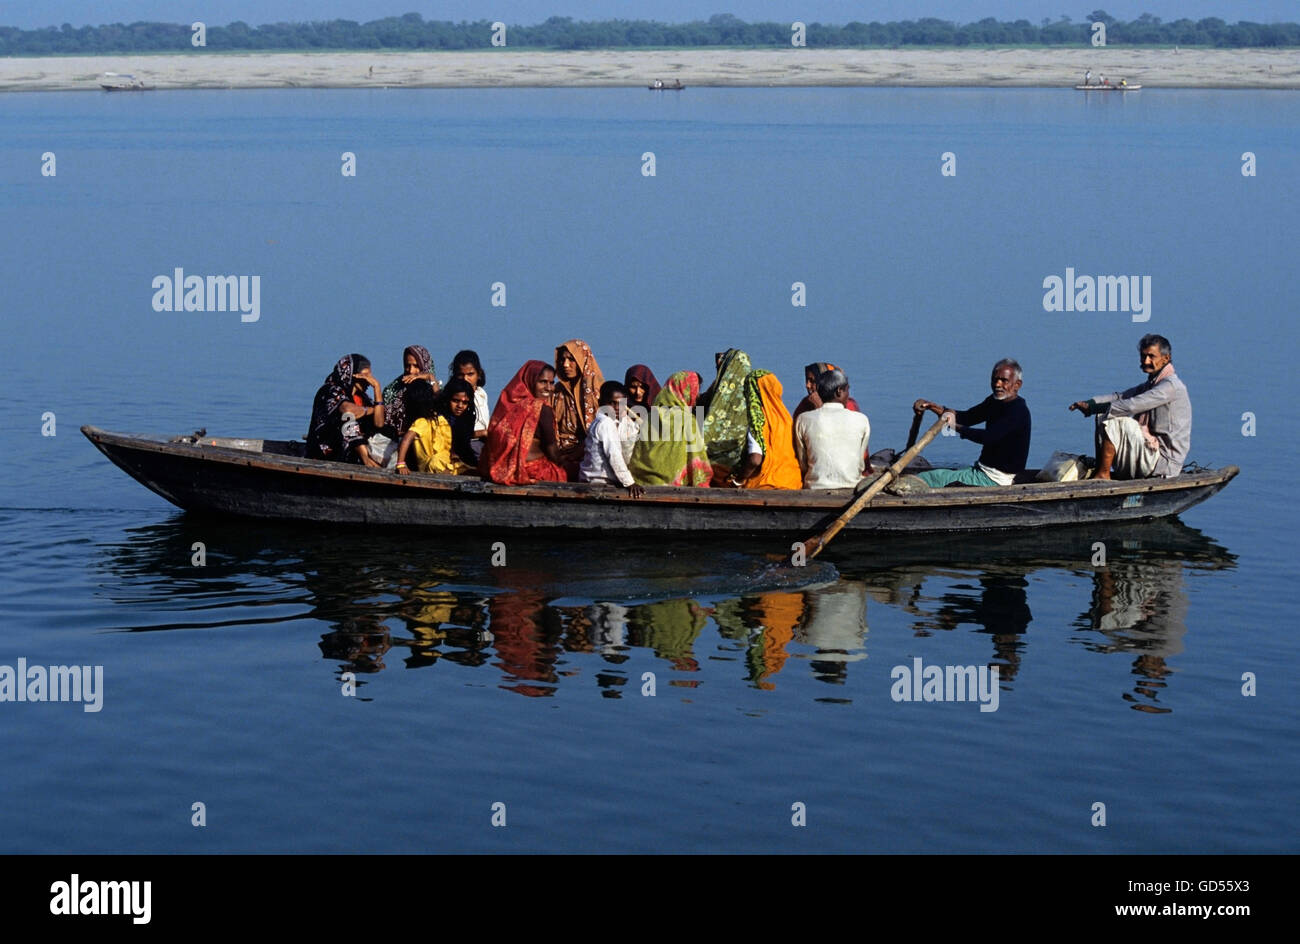 Boat on the River Ganges Stock Photo